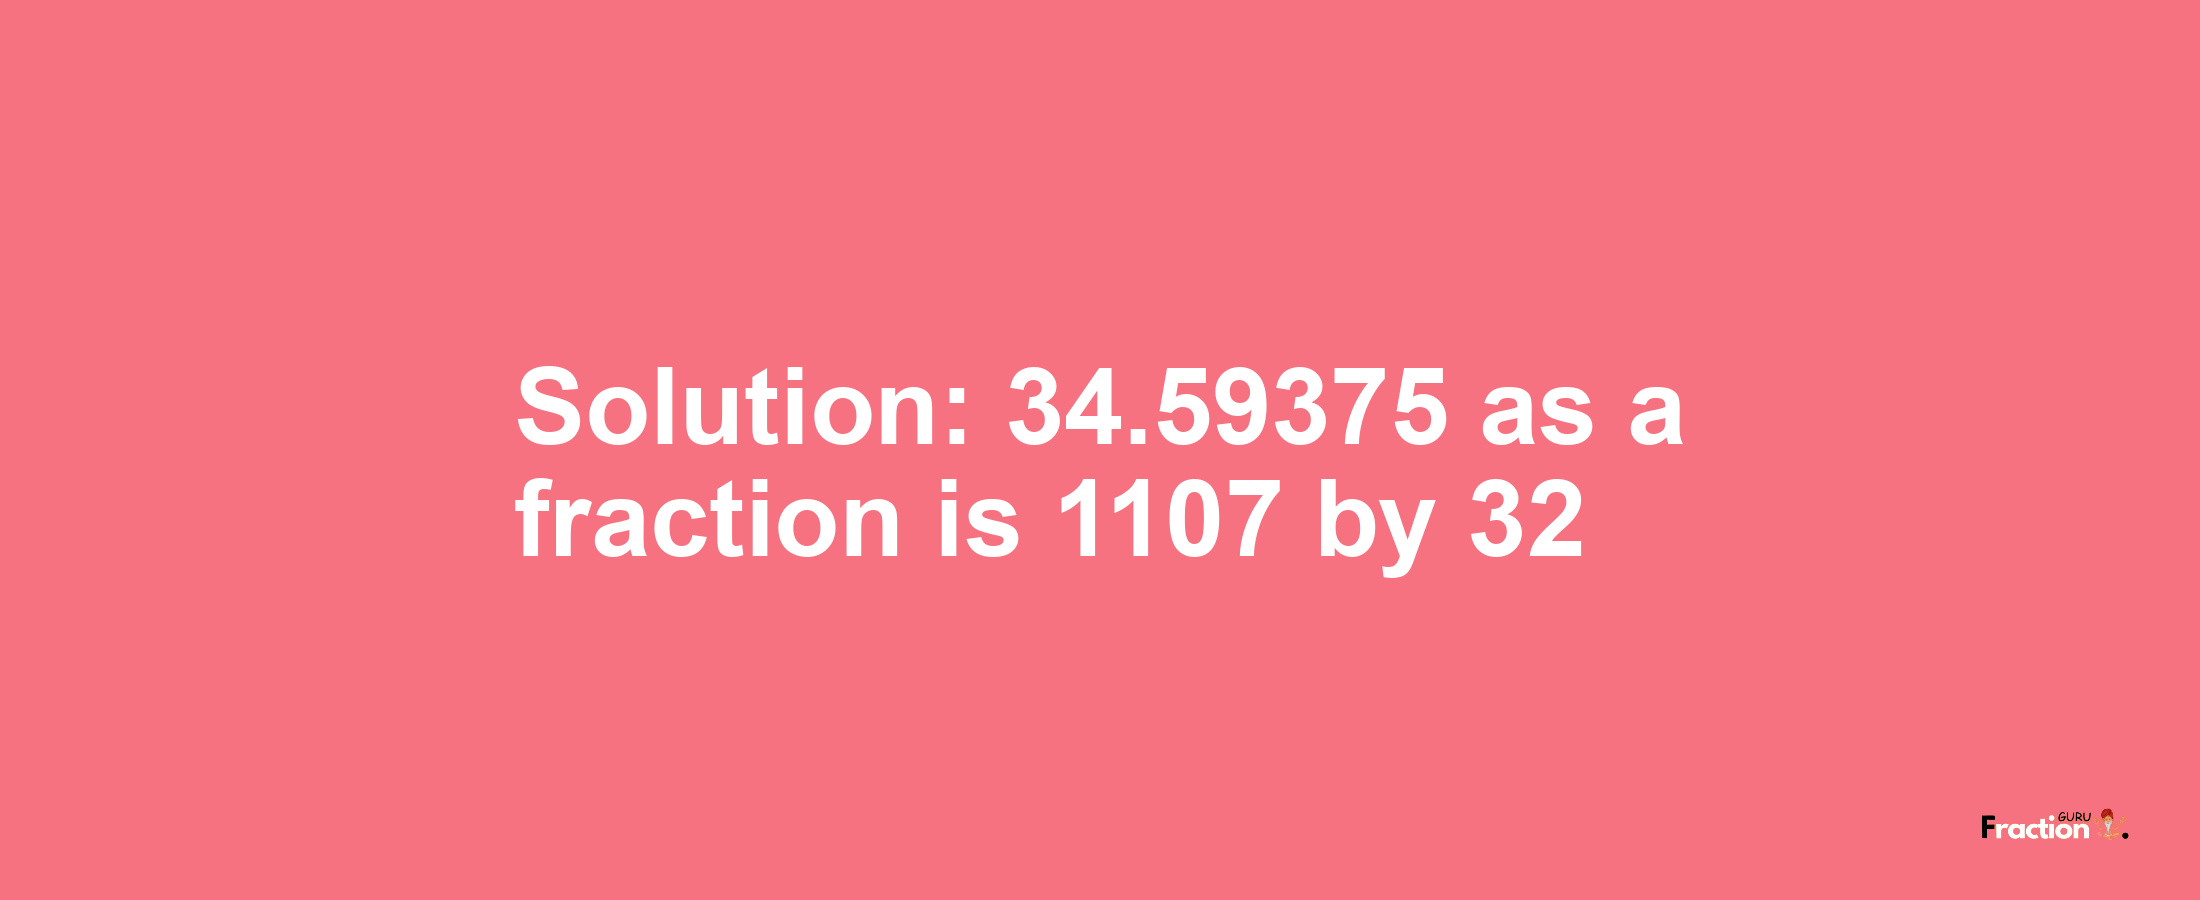 Solution:34.59375 as a fraction is 1107/32